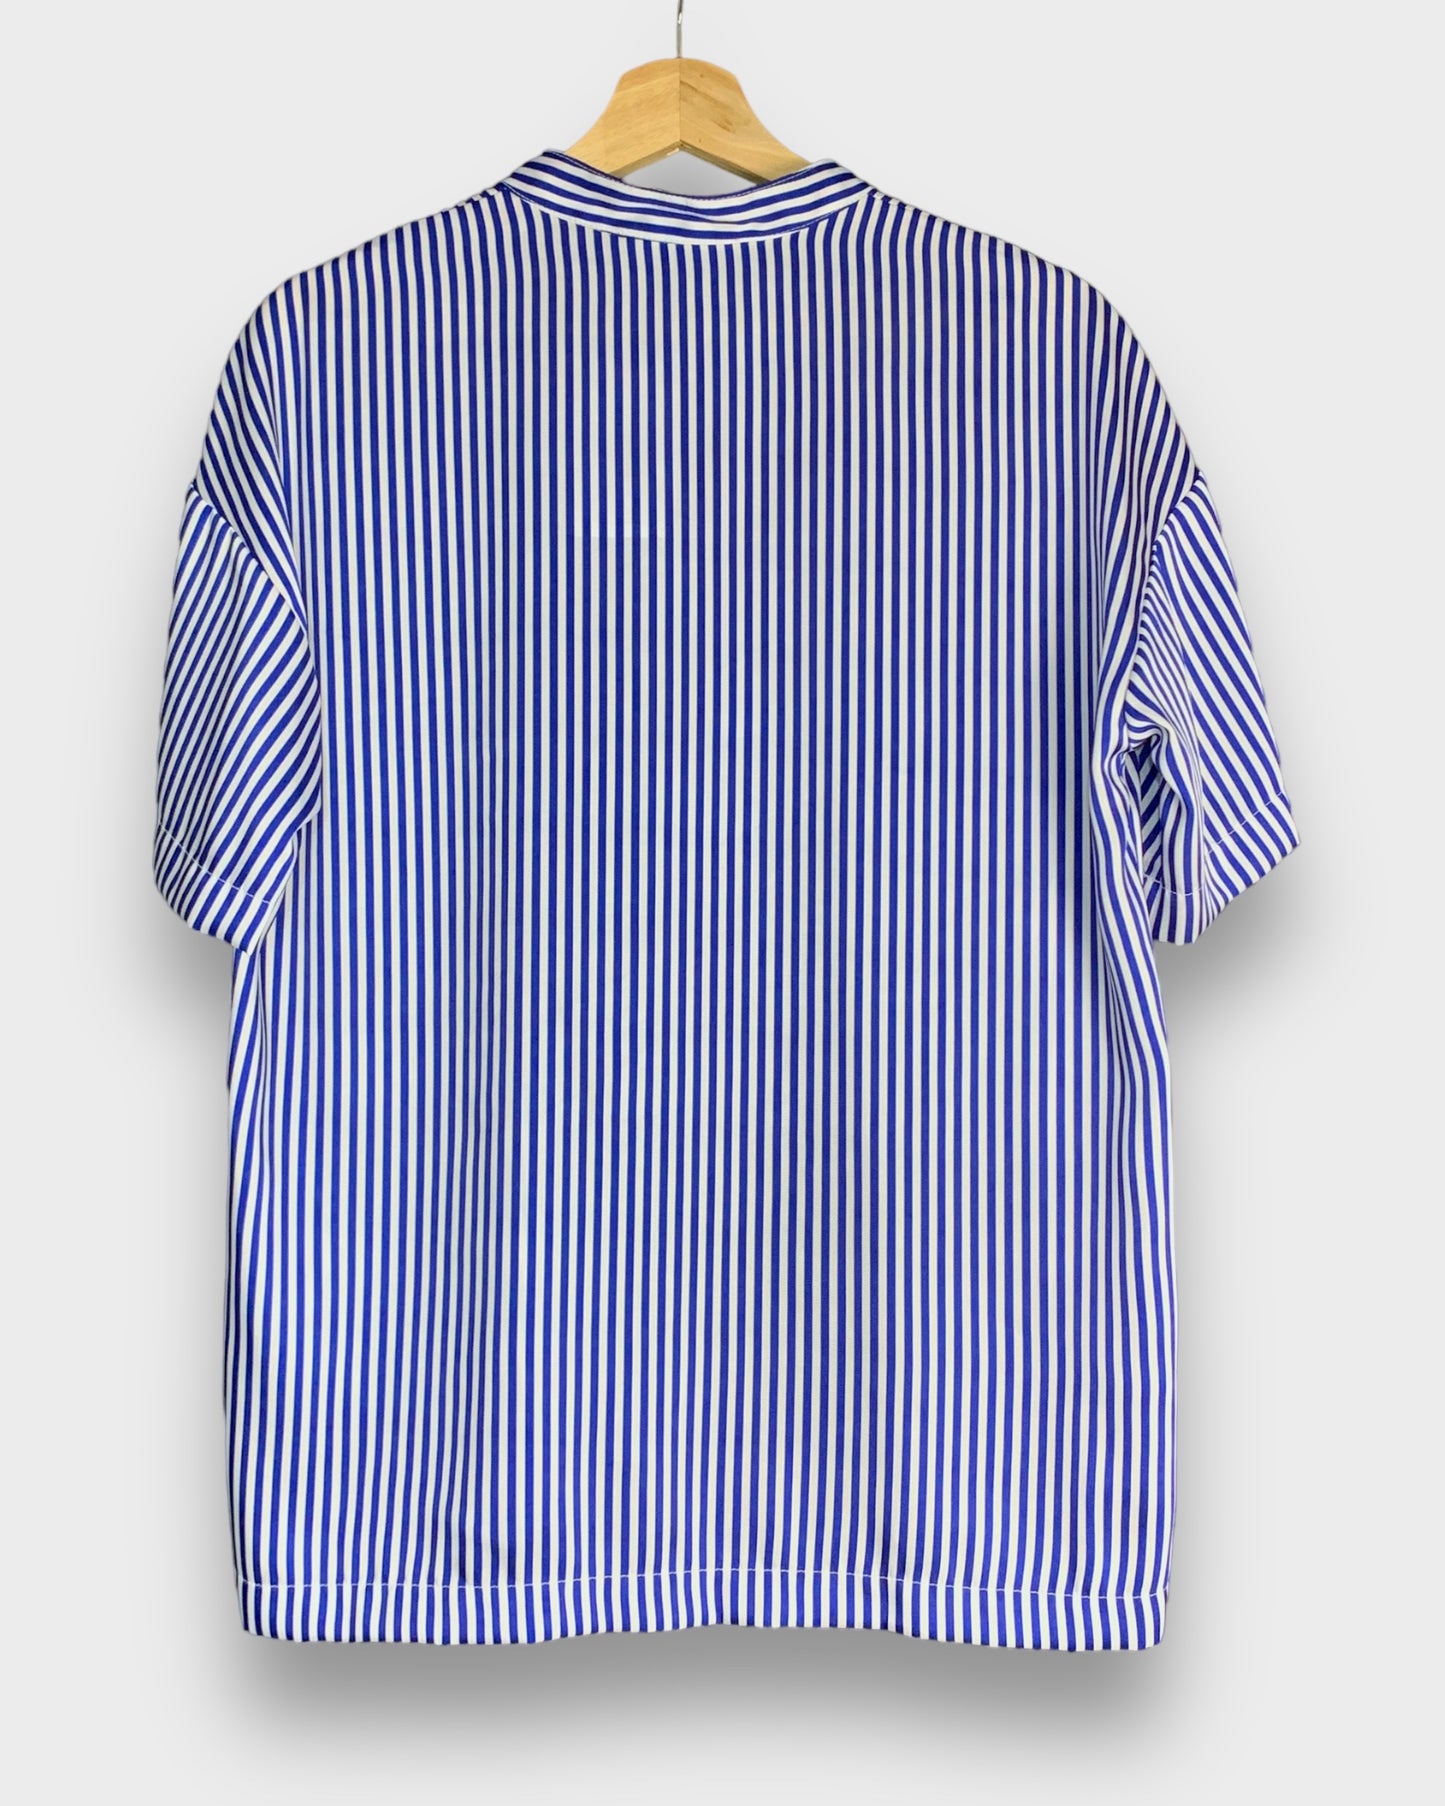 Judith &amp; Charles white and blue striped short-sleeved shirt